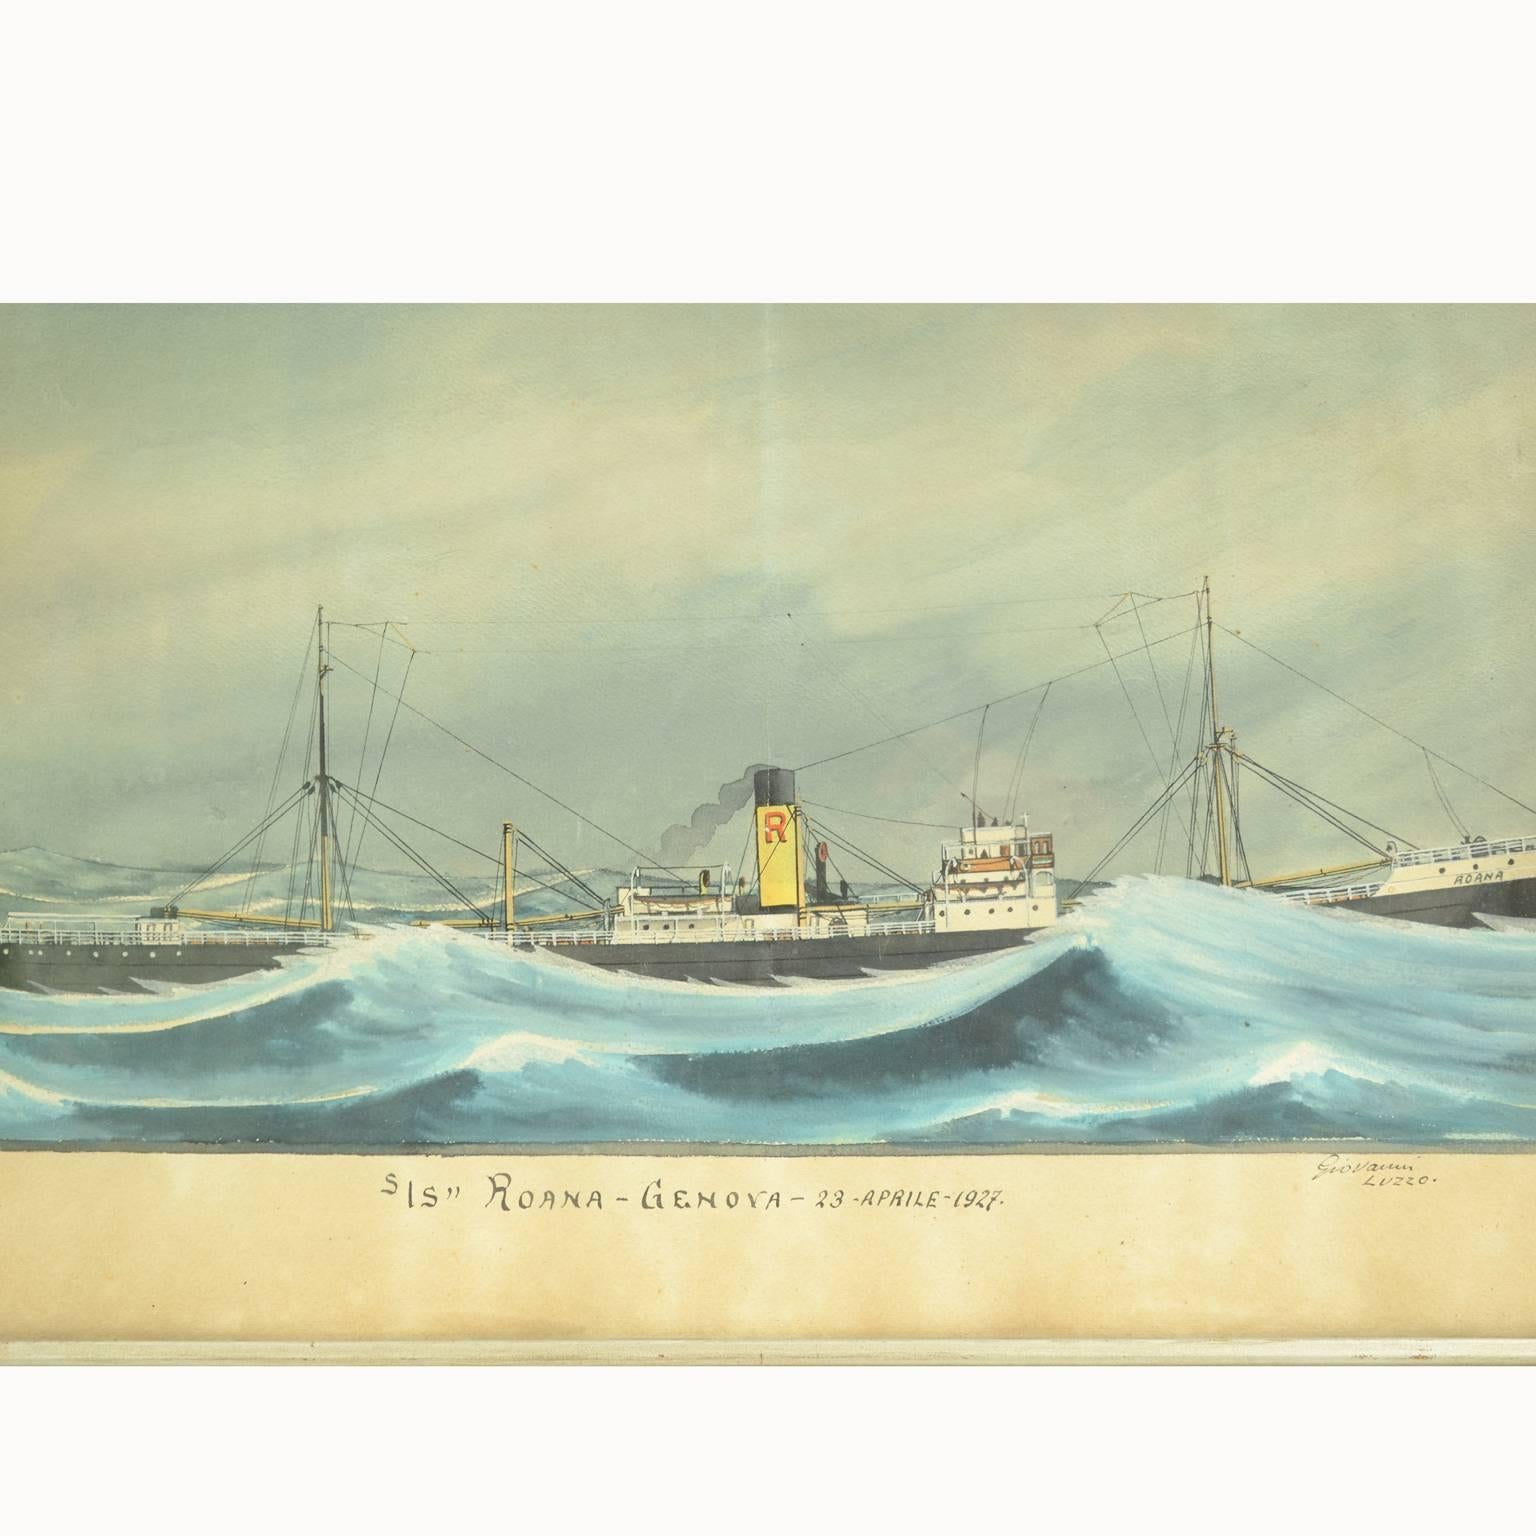 Nautical ex voto, votive painting, tempera on cardboard, made by the marine painter Giovanni Luzzo, depicting the steamship Roana in trouble among the waves. Under the painting it is written S / S Roana Genoa April 23 1927. Coeval frame in good